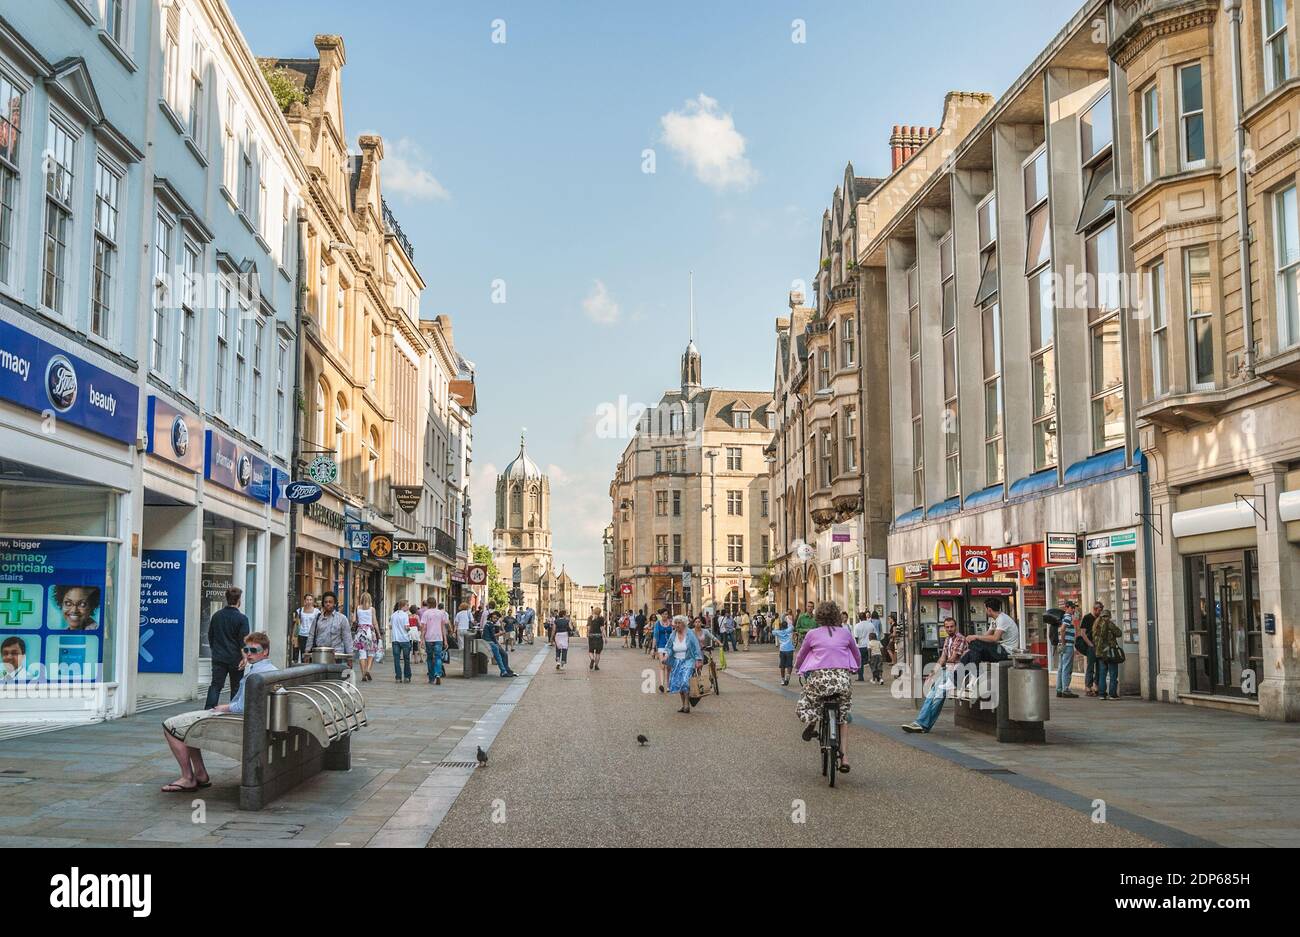 Shopping area at the historic town center of Oxford, Oxfordshire, England Stock Photo